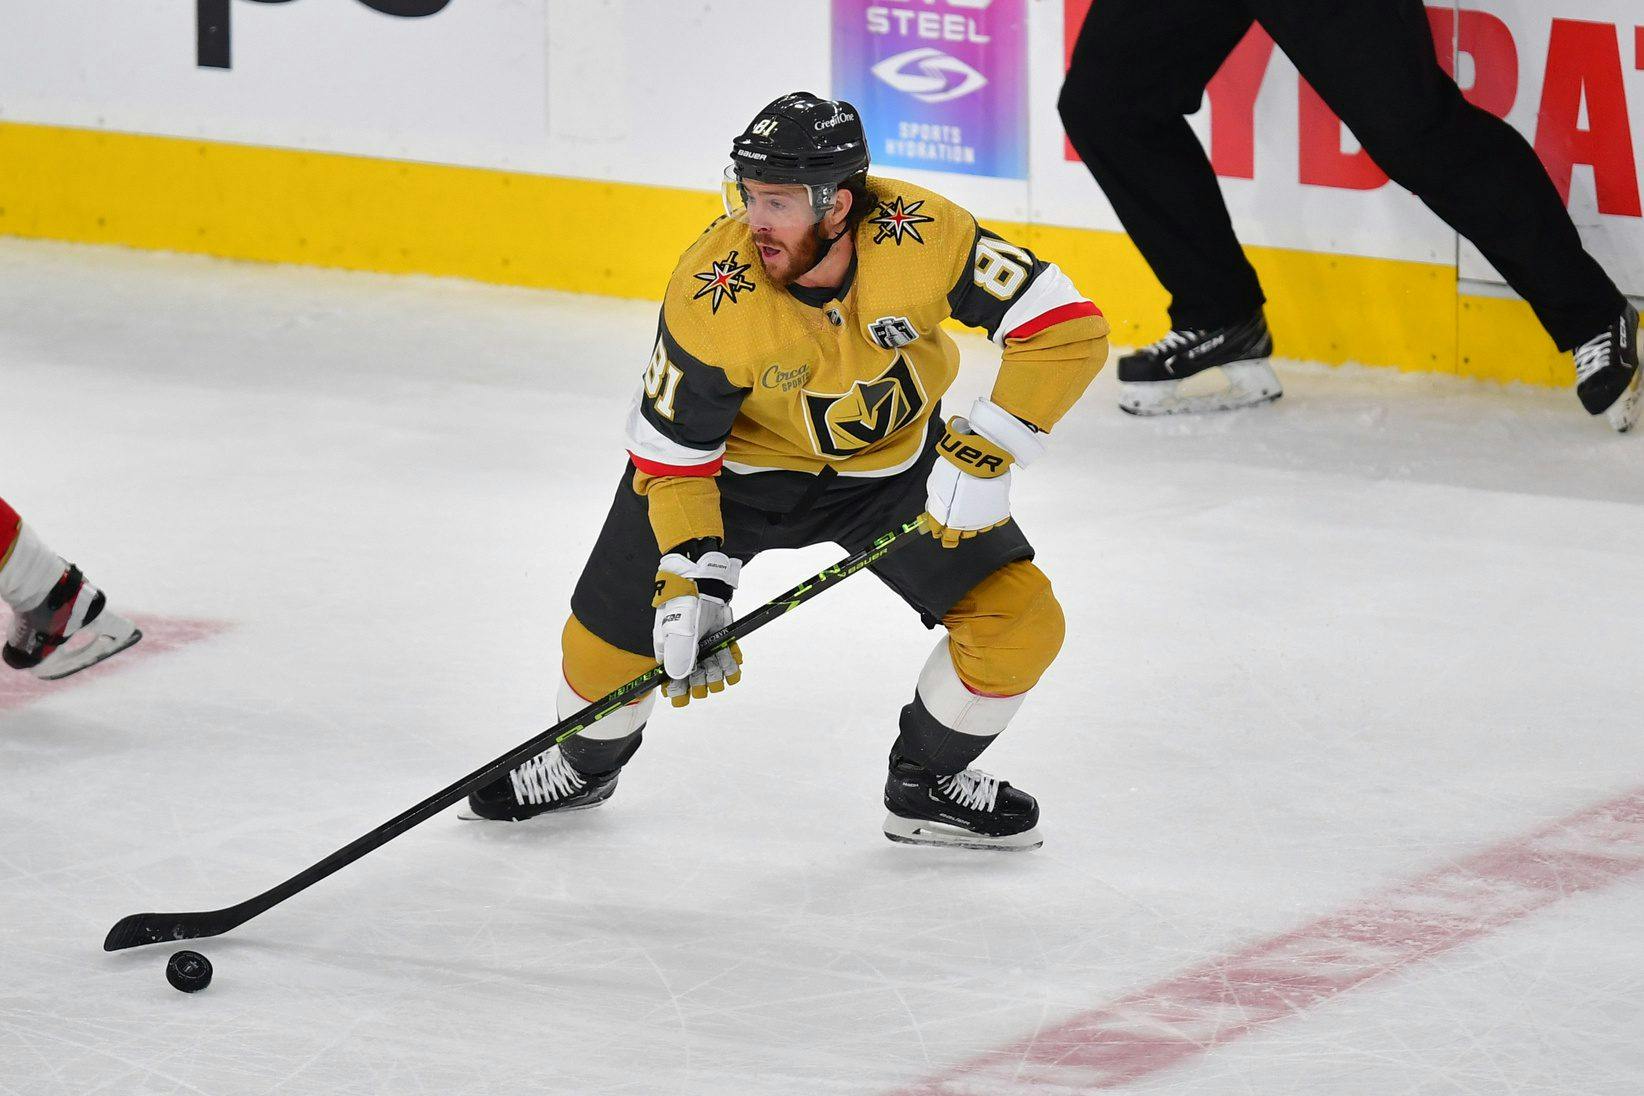 Stanley Cup Playoffs Day 49: Marchessault, Howden both score twice for Golden Knights in 7-2 blowout in Game 2